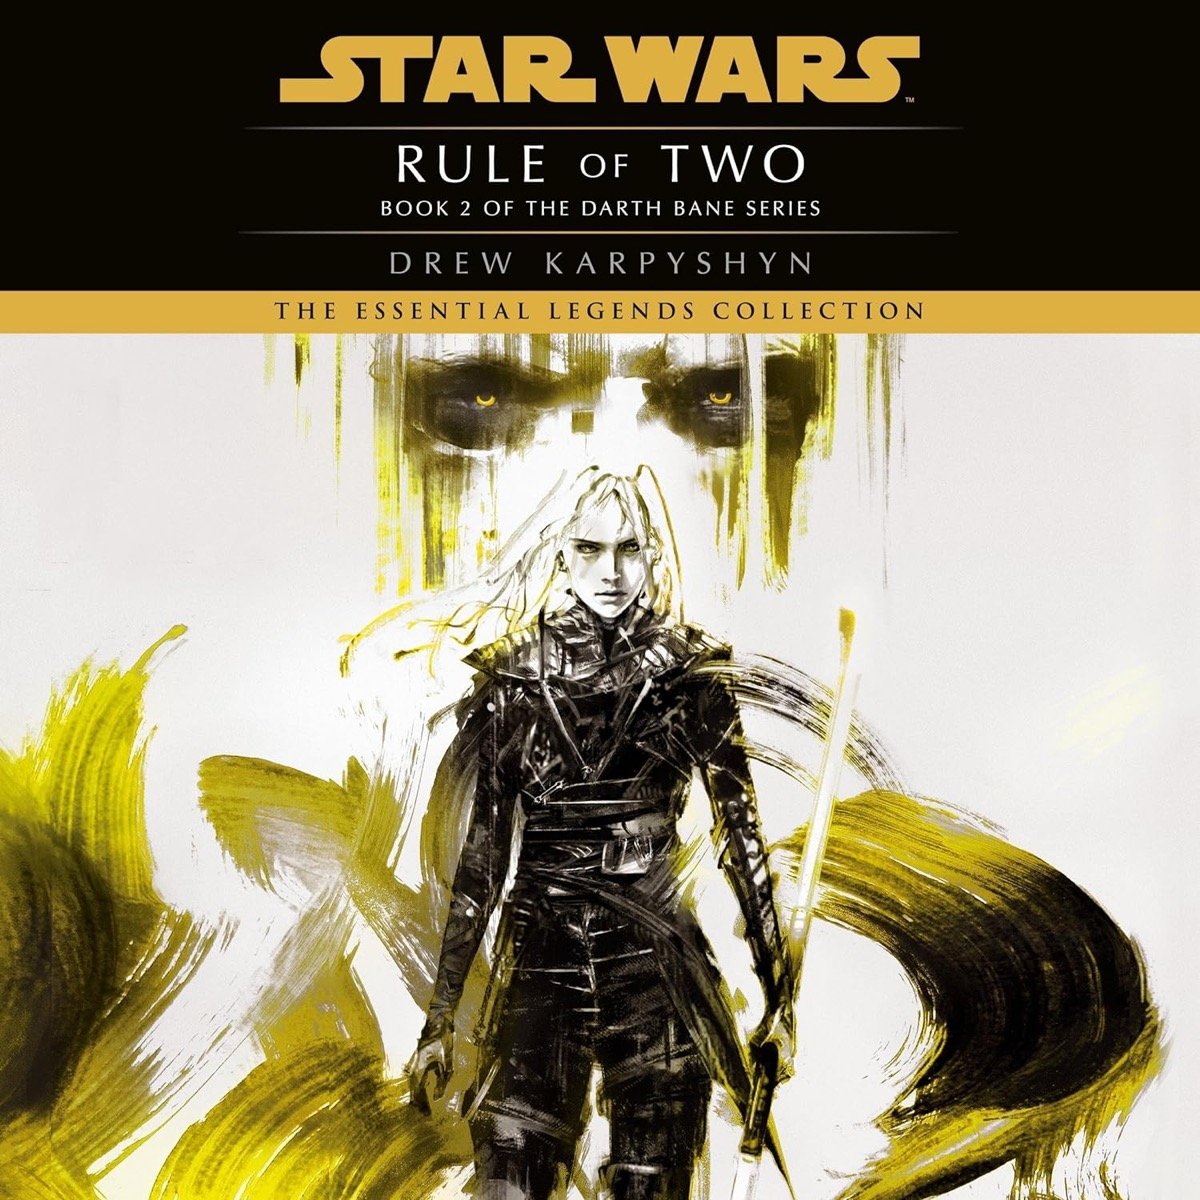 Cover art for "Rule of Two- Star Wars Legends" featuring a young sword wielding warrior